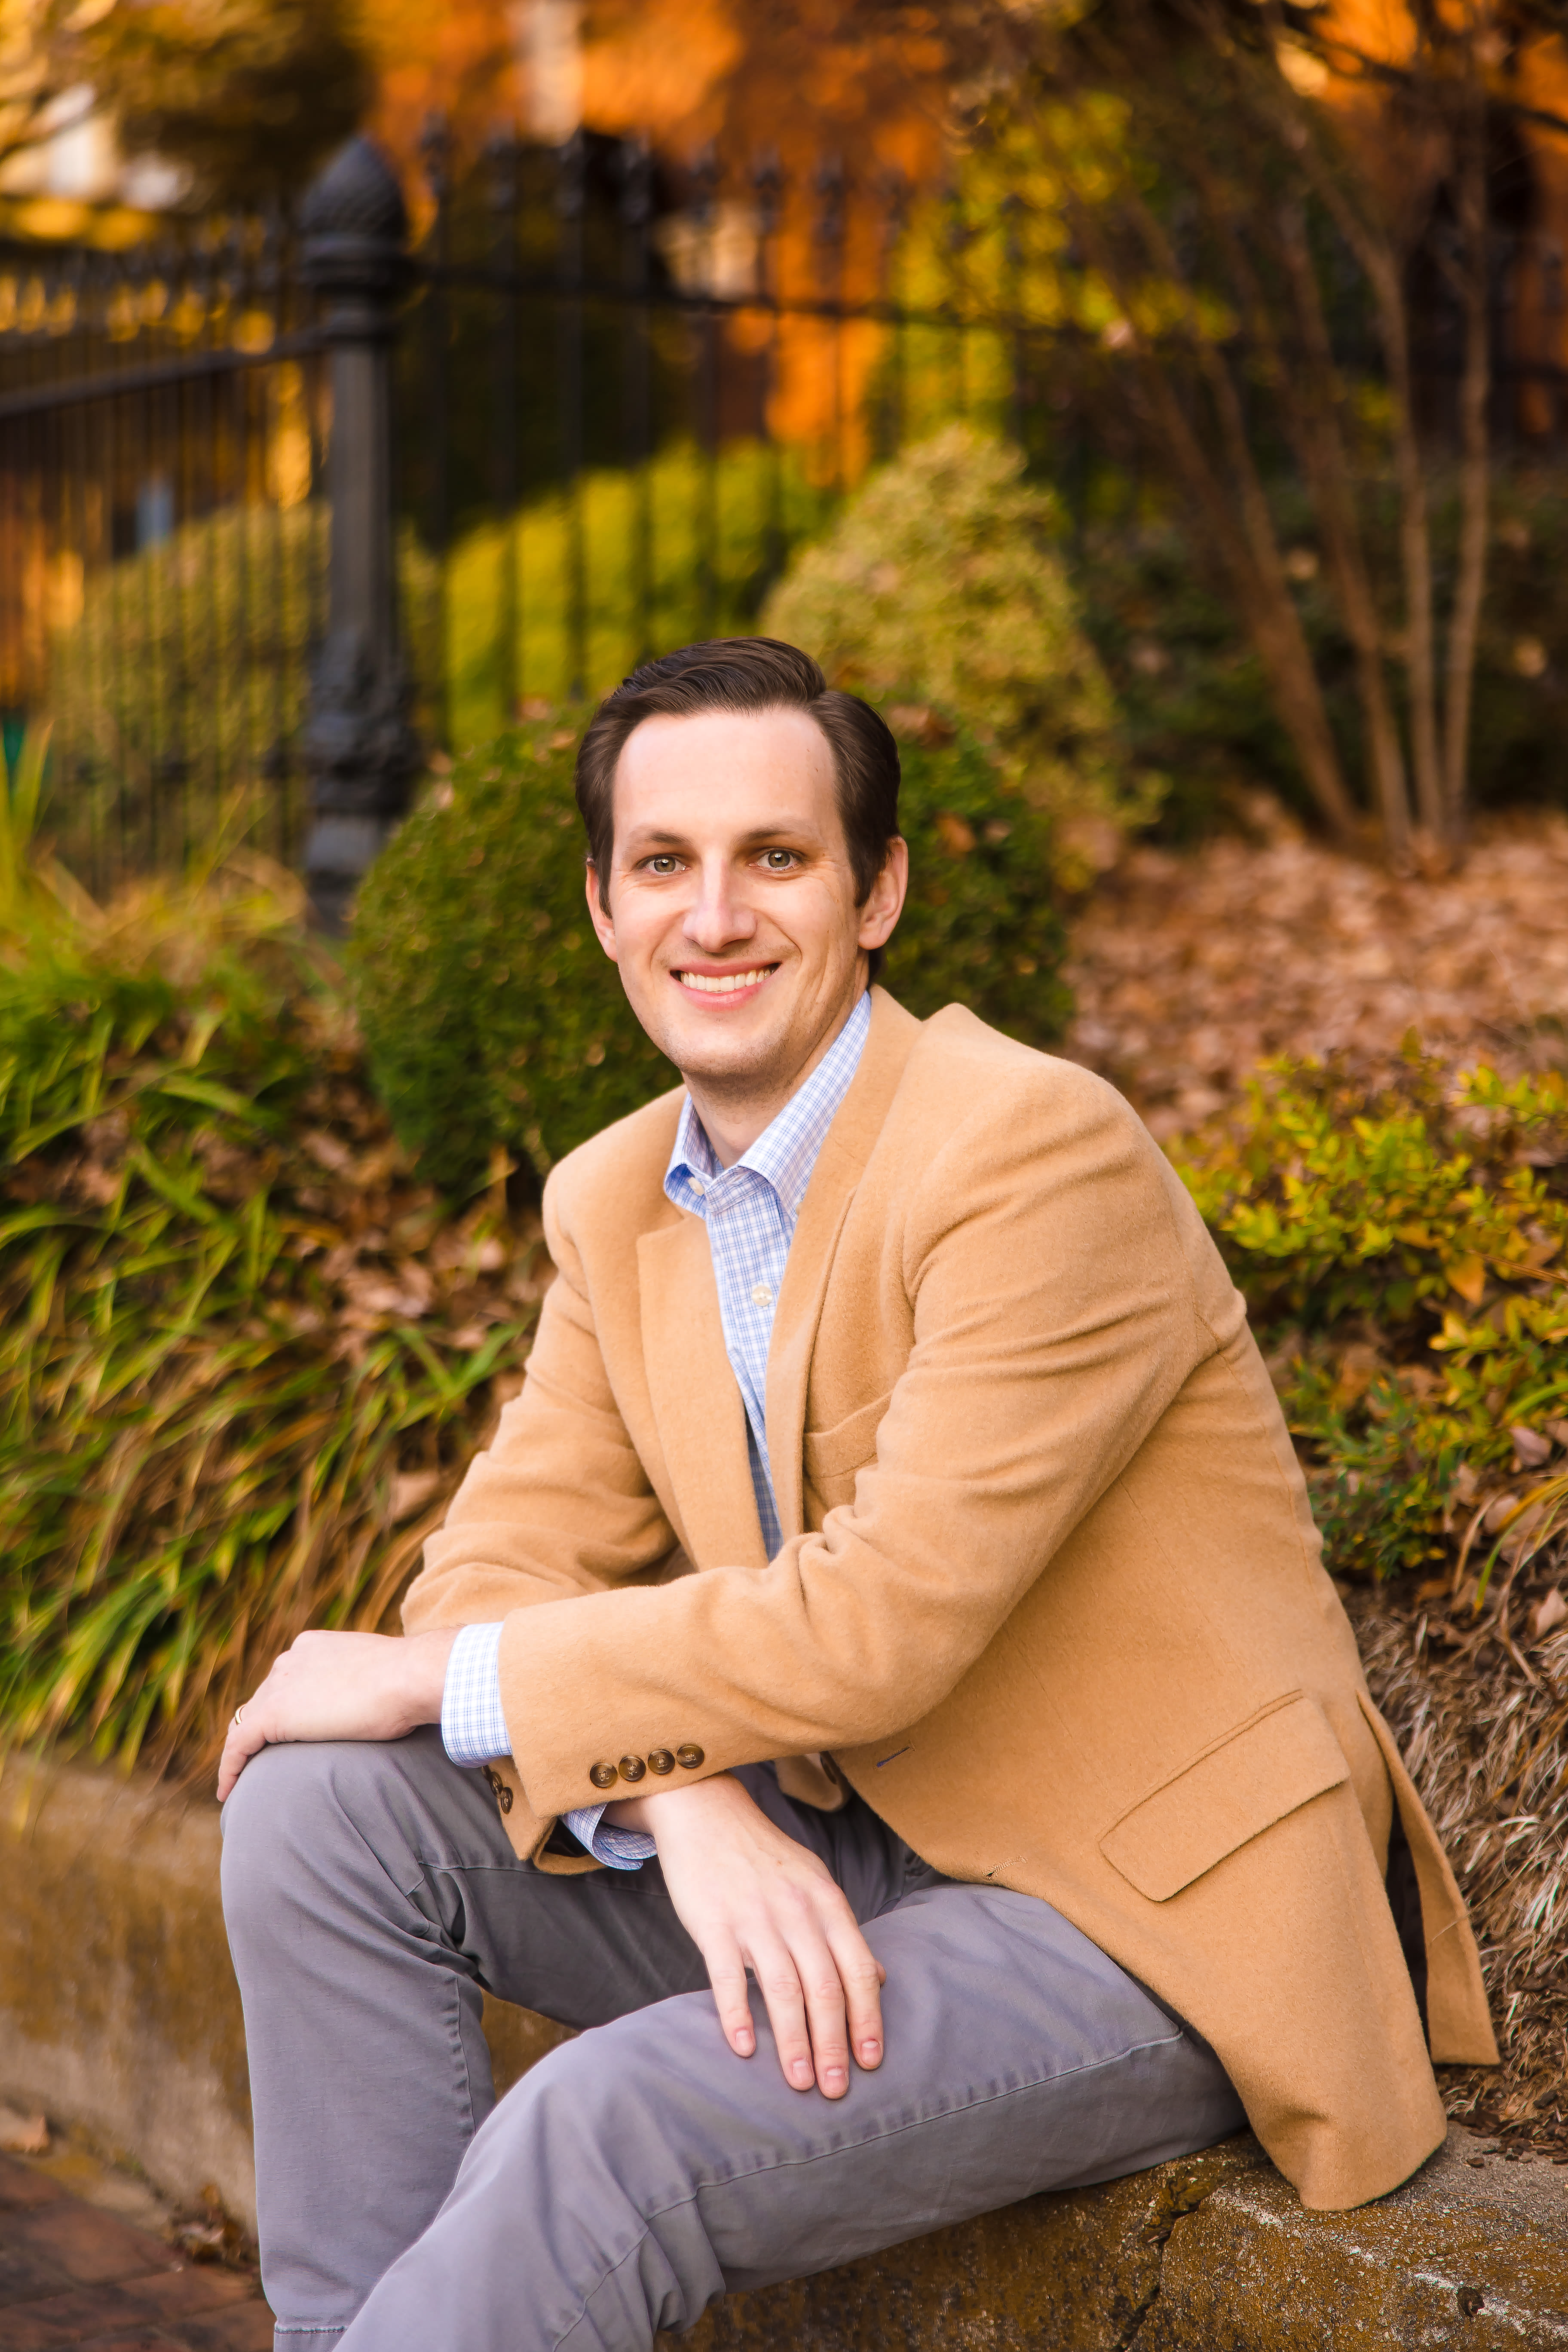 Carter Pelot, Director of Acquisitions for S&S Property Management in Nashville, Tennessee